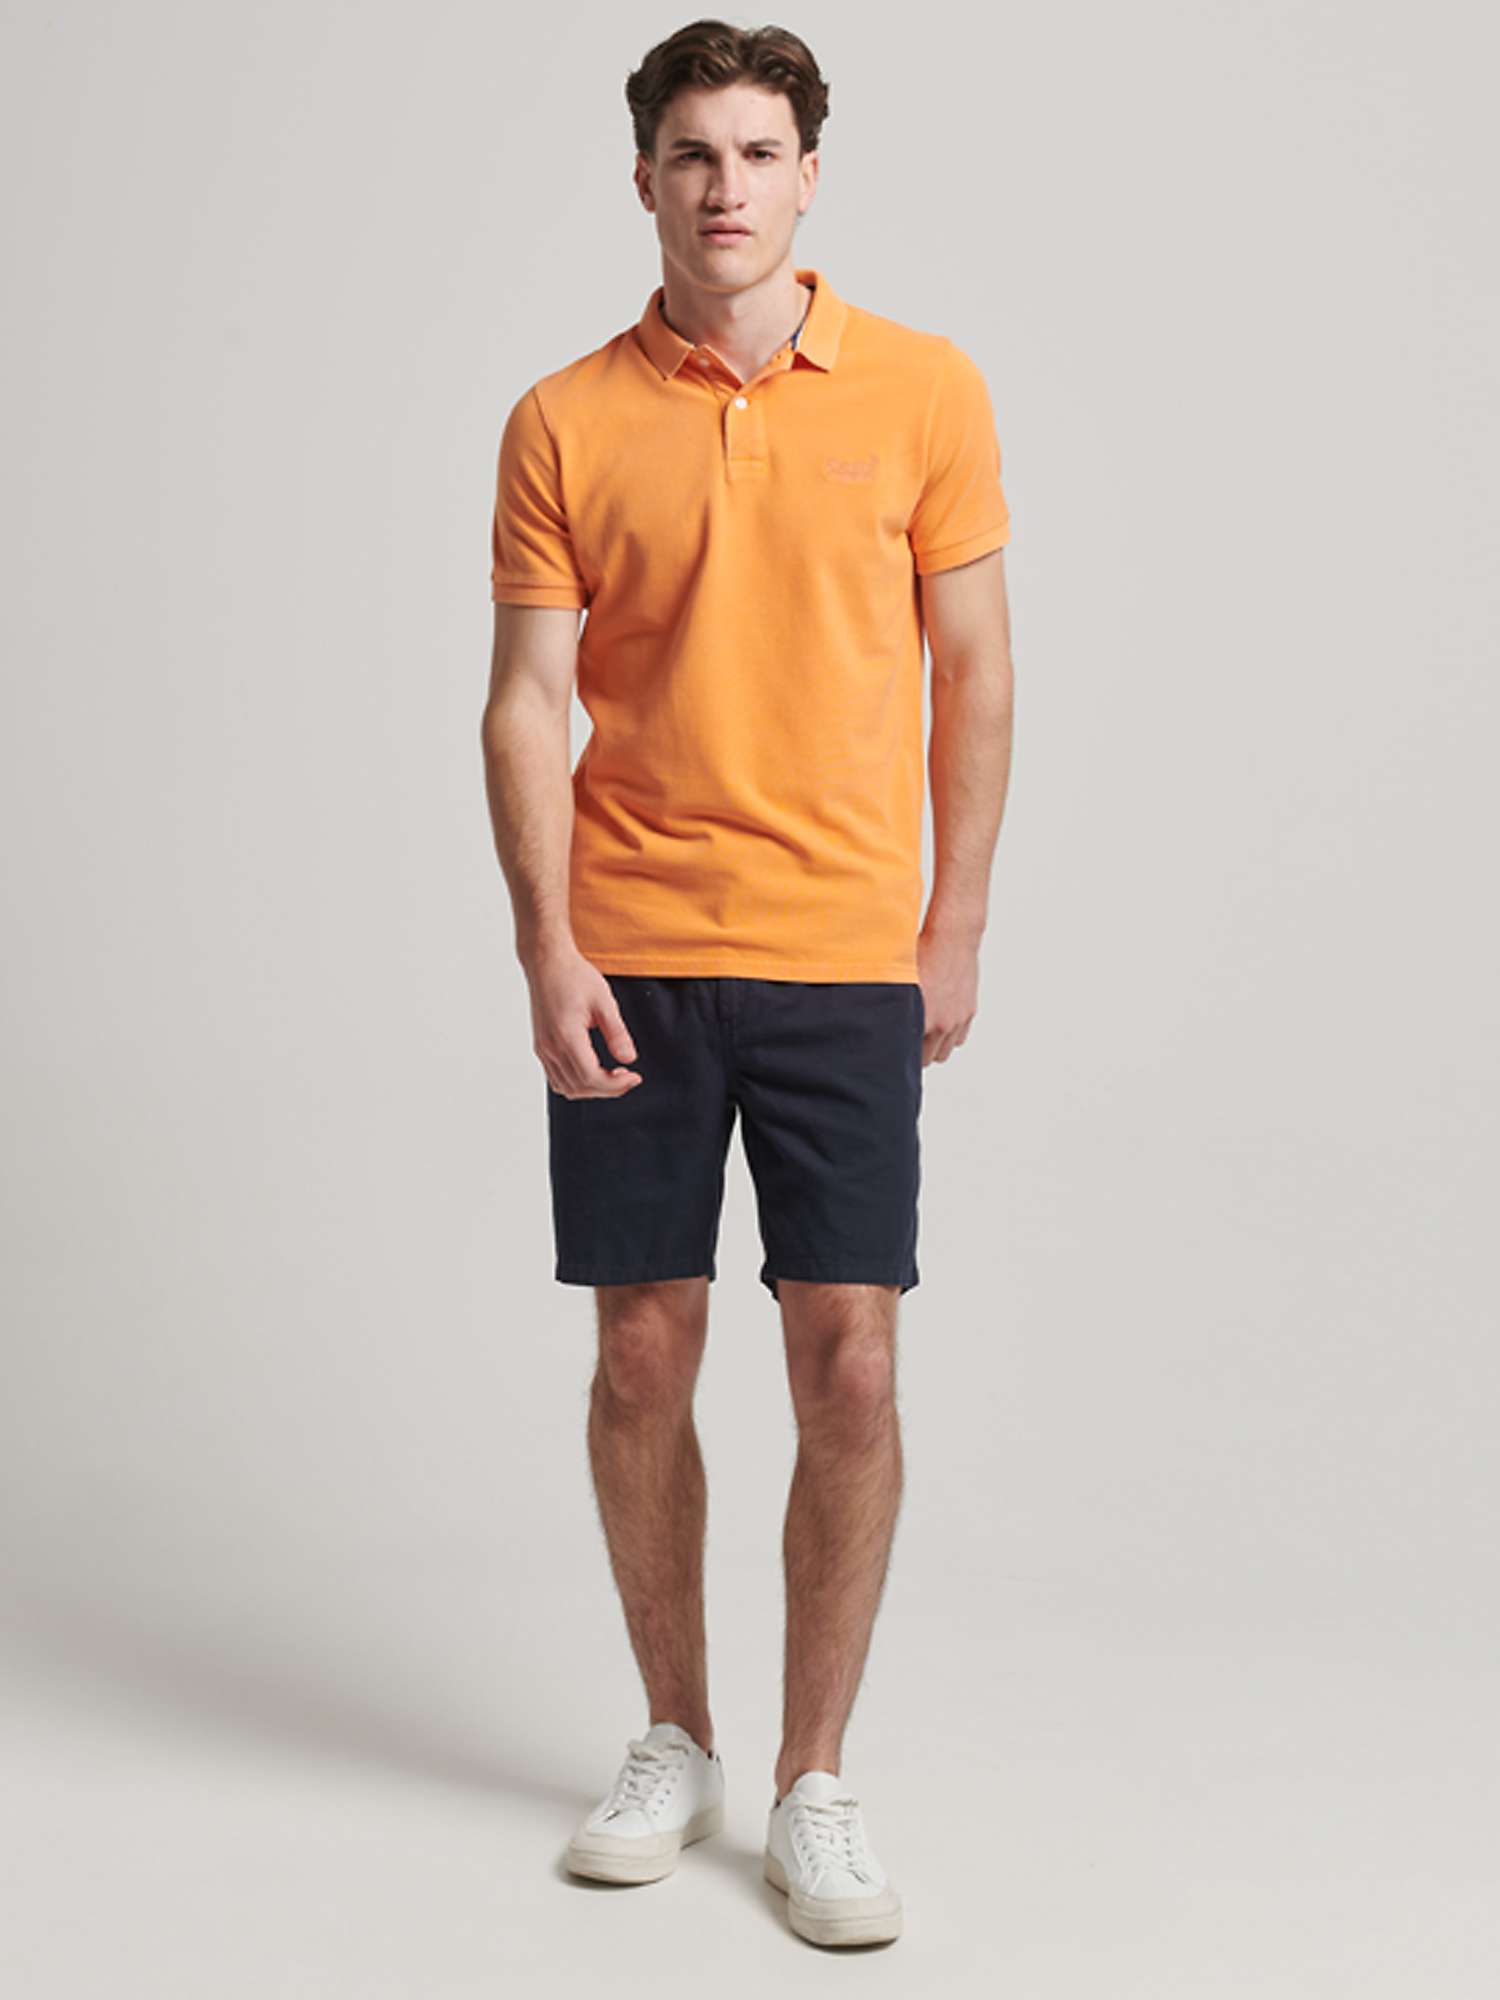 Buy Superdry Pique Polo Shirt Online at johnlewis.com